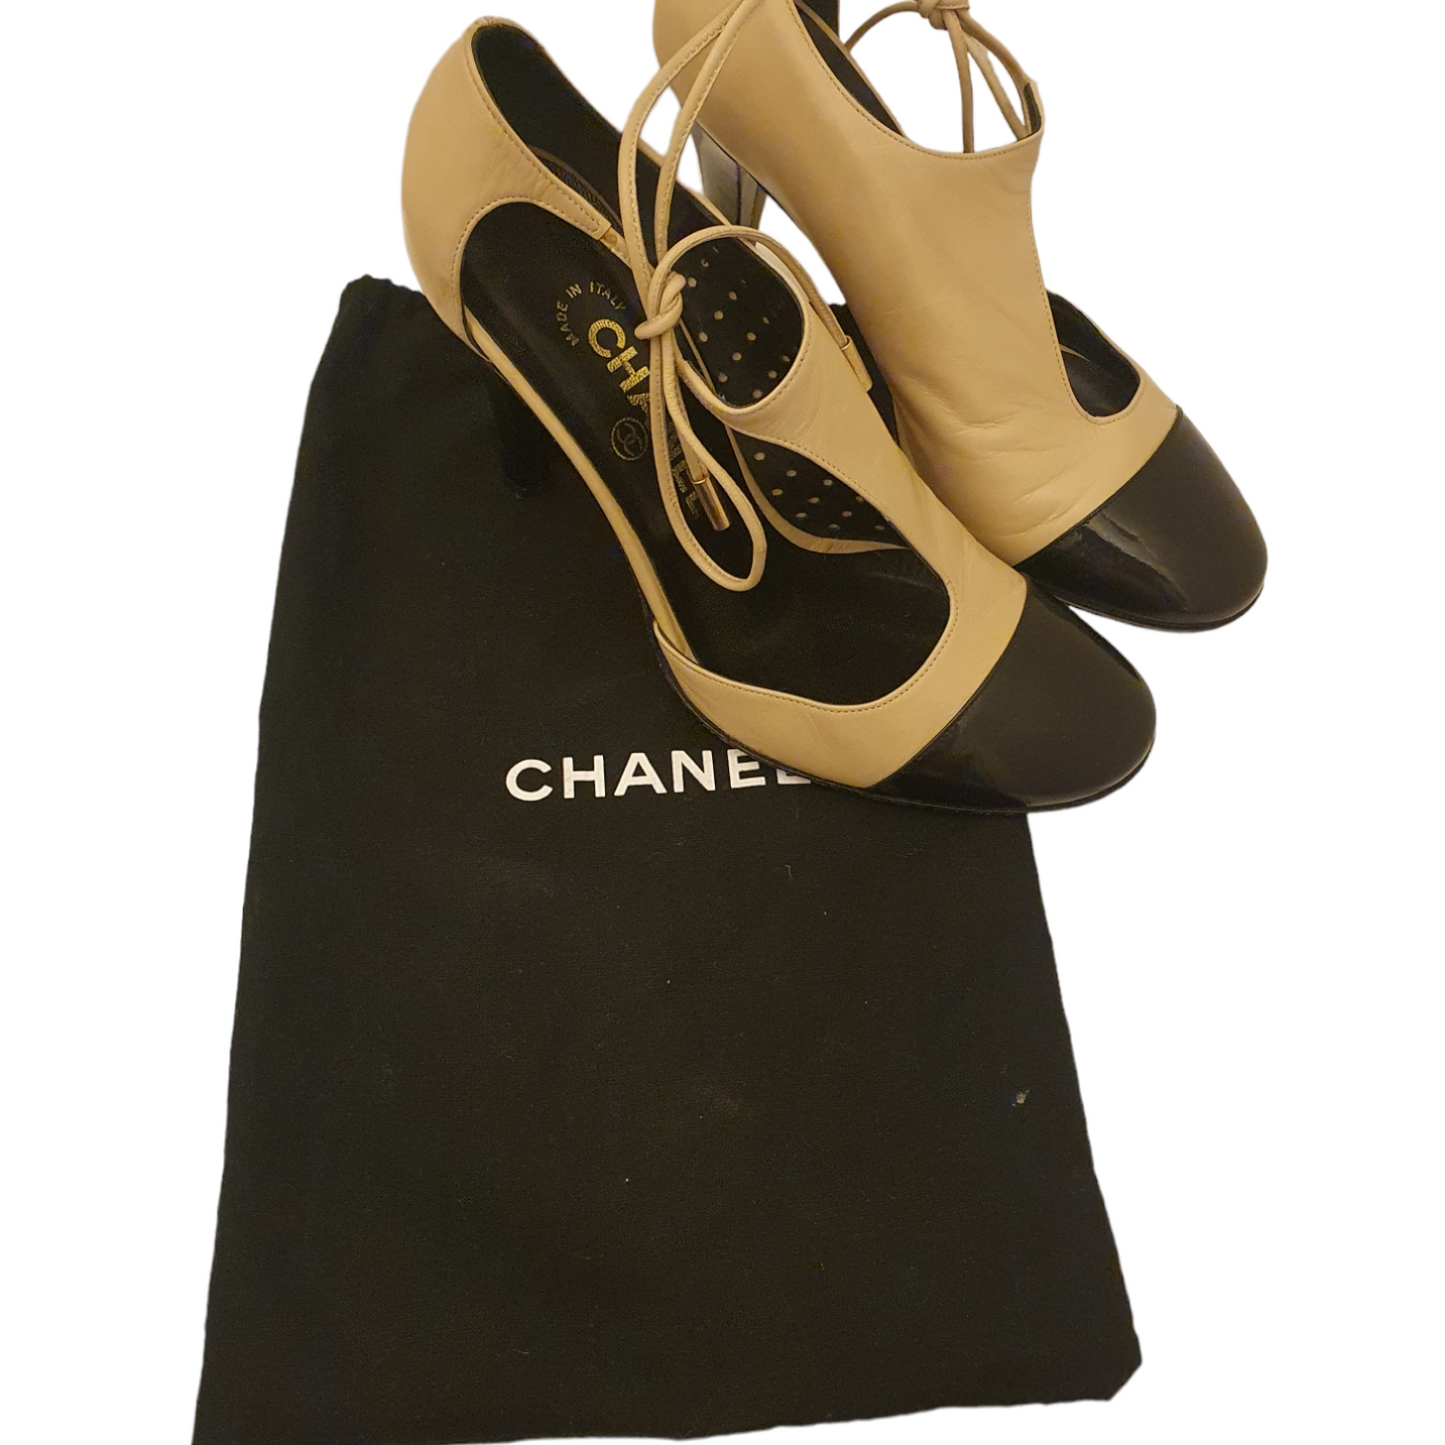 Chanel Black and cream heeled shoes, size 4/37